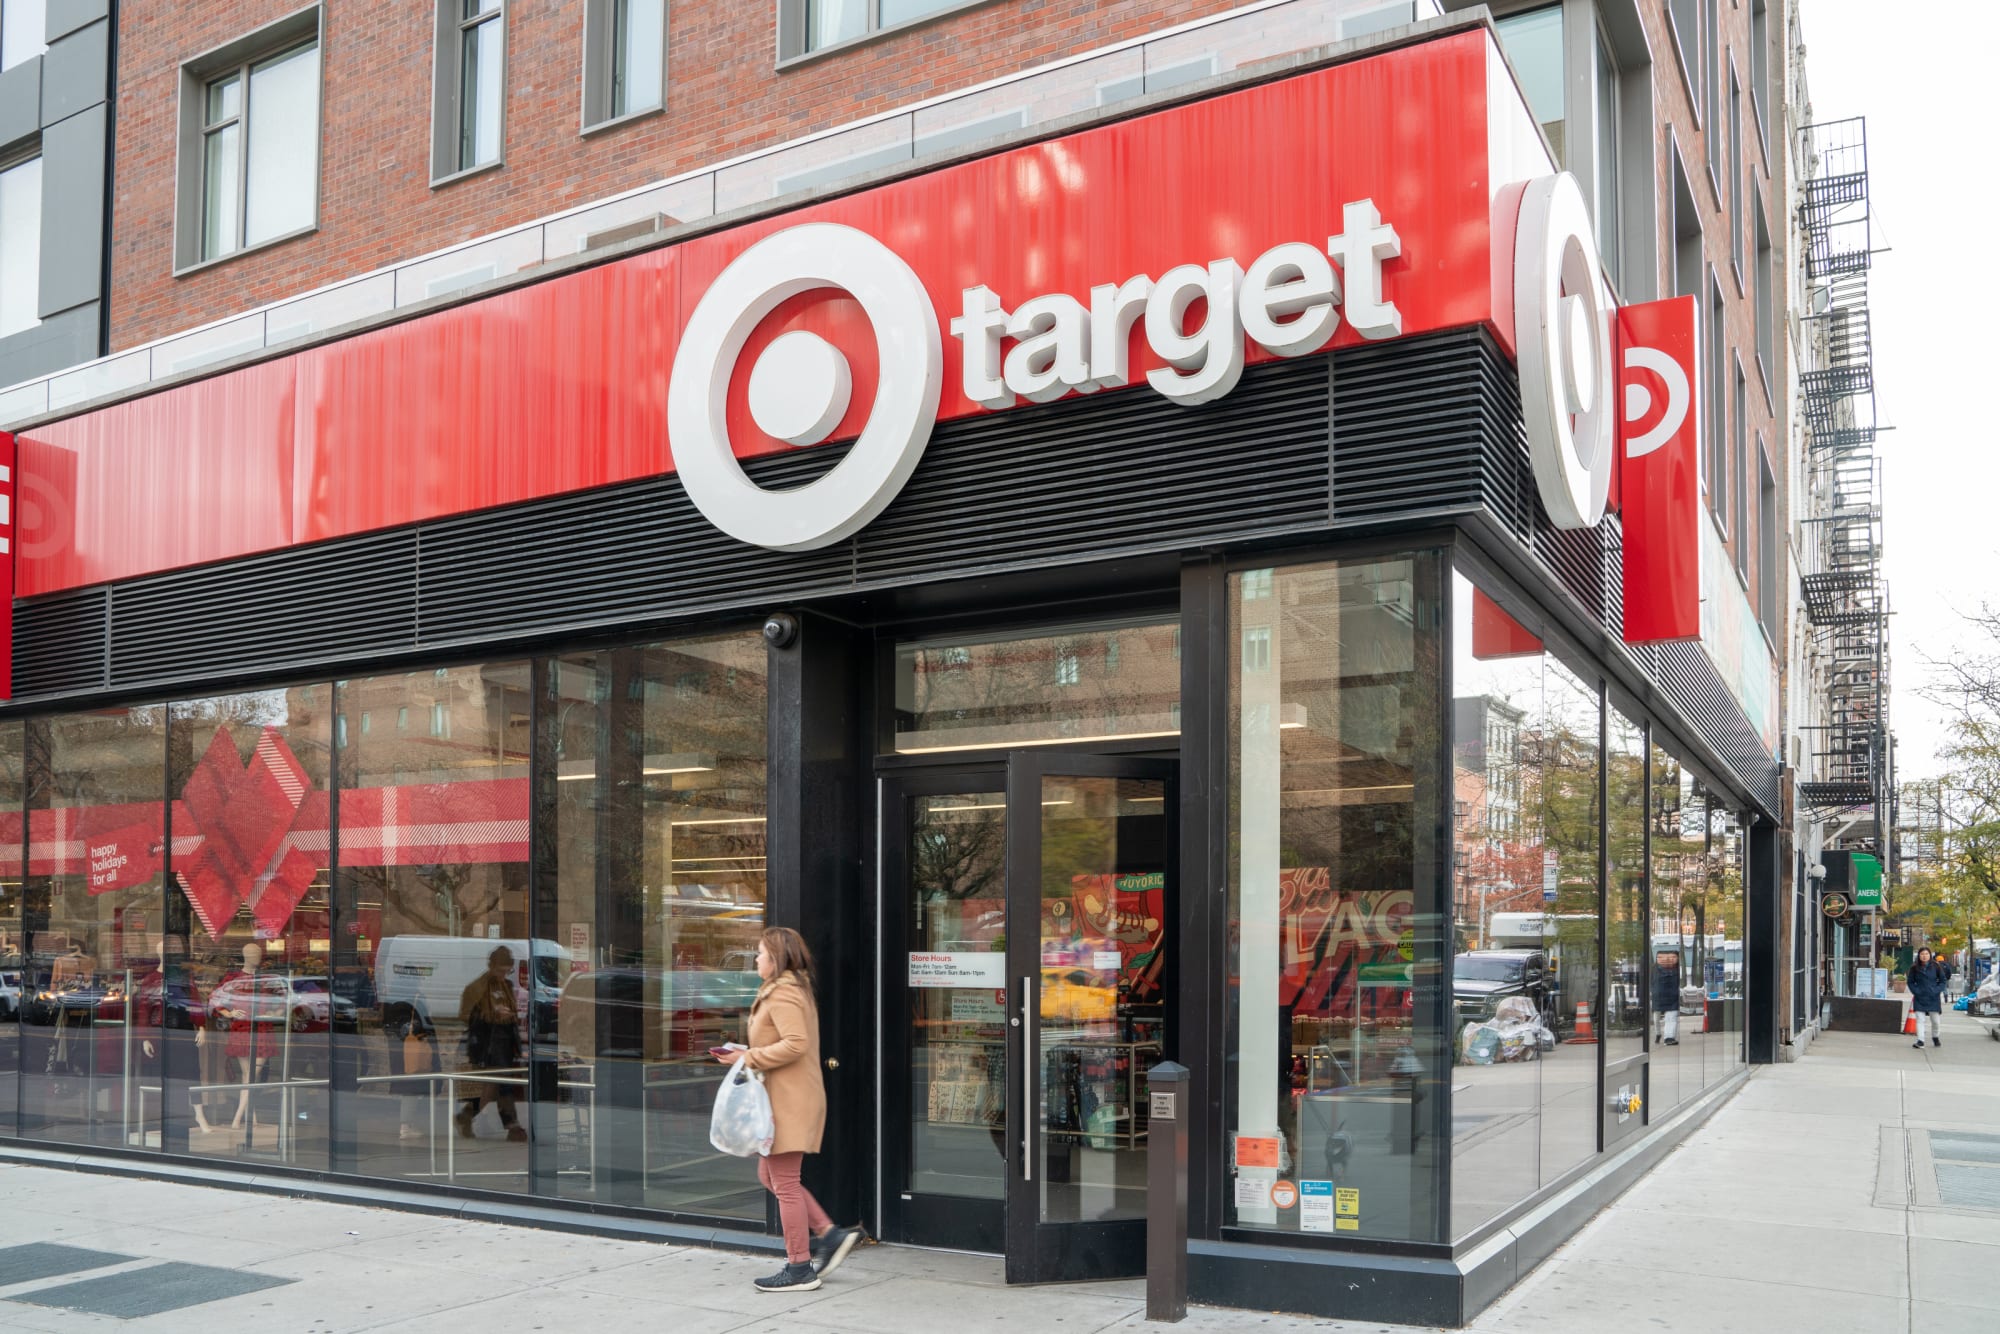 Is Target open on Christmas Eve 2019?